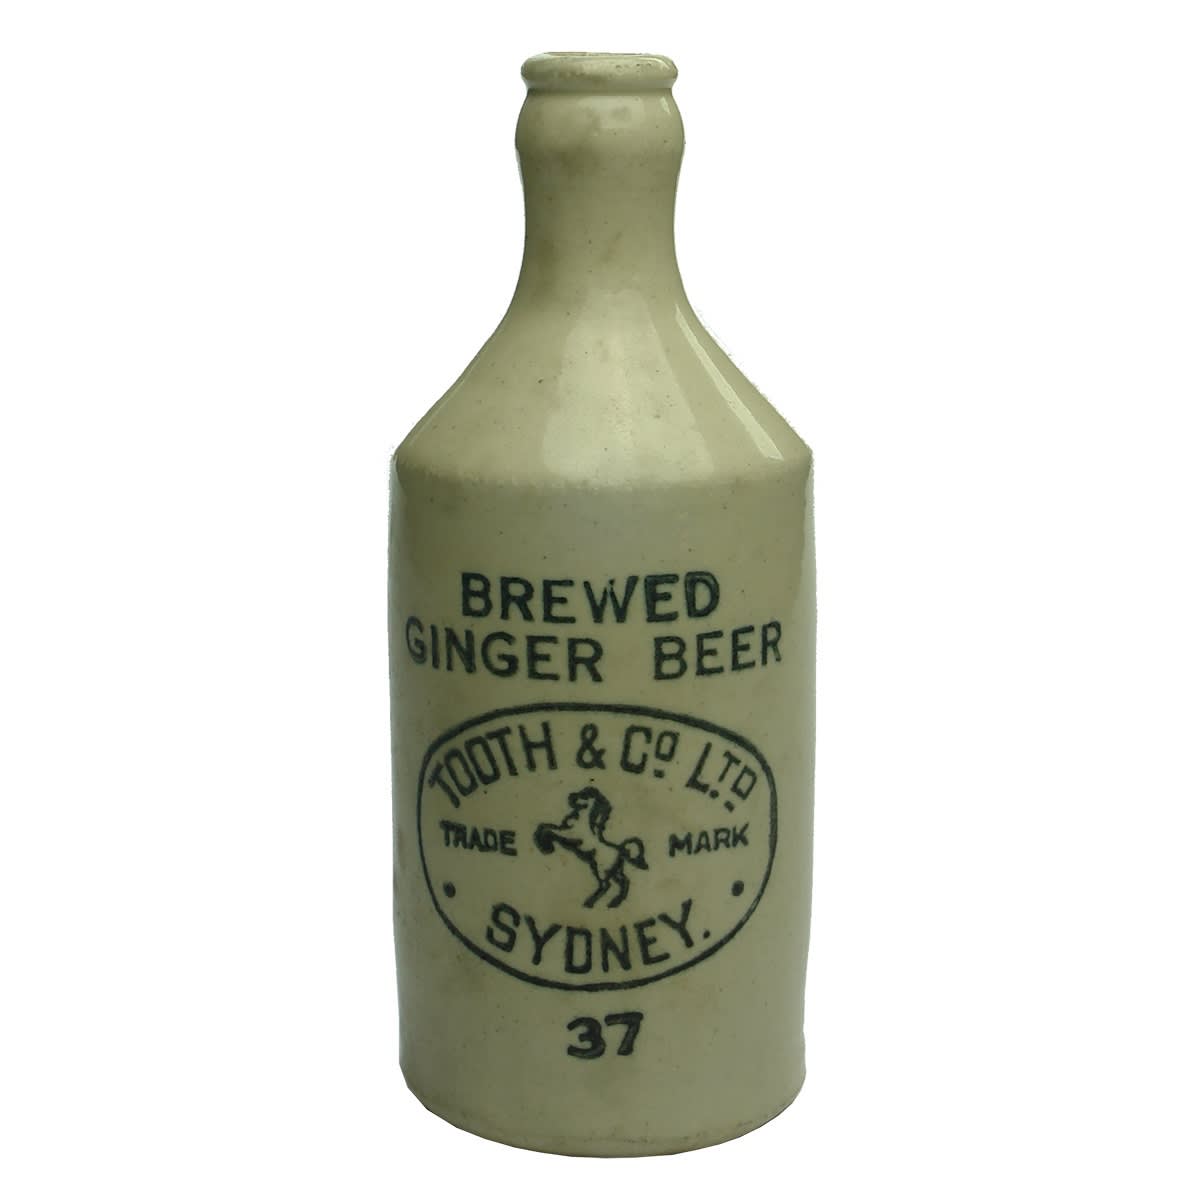 Ginger Beer. Tooth & Co Ltd Sydney. Rearing Horse. 37. All White Crown Seal. (New South Wales)